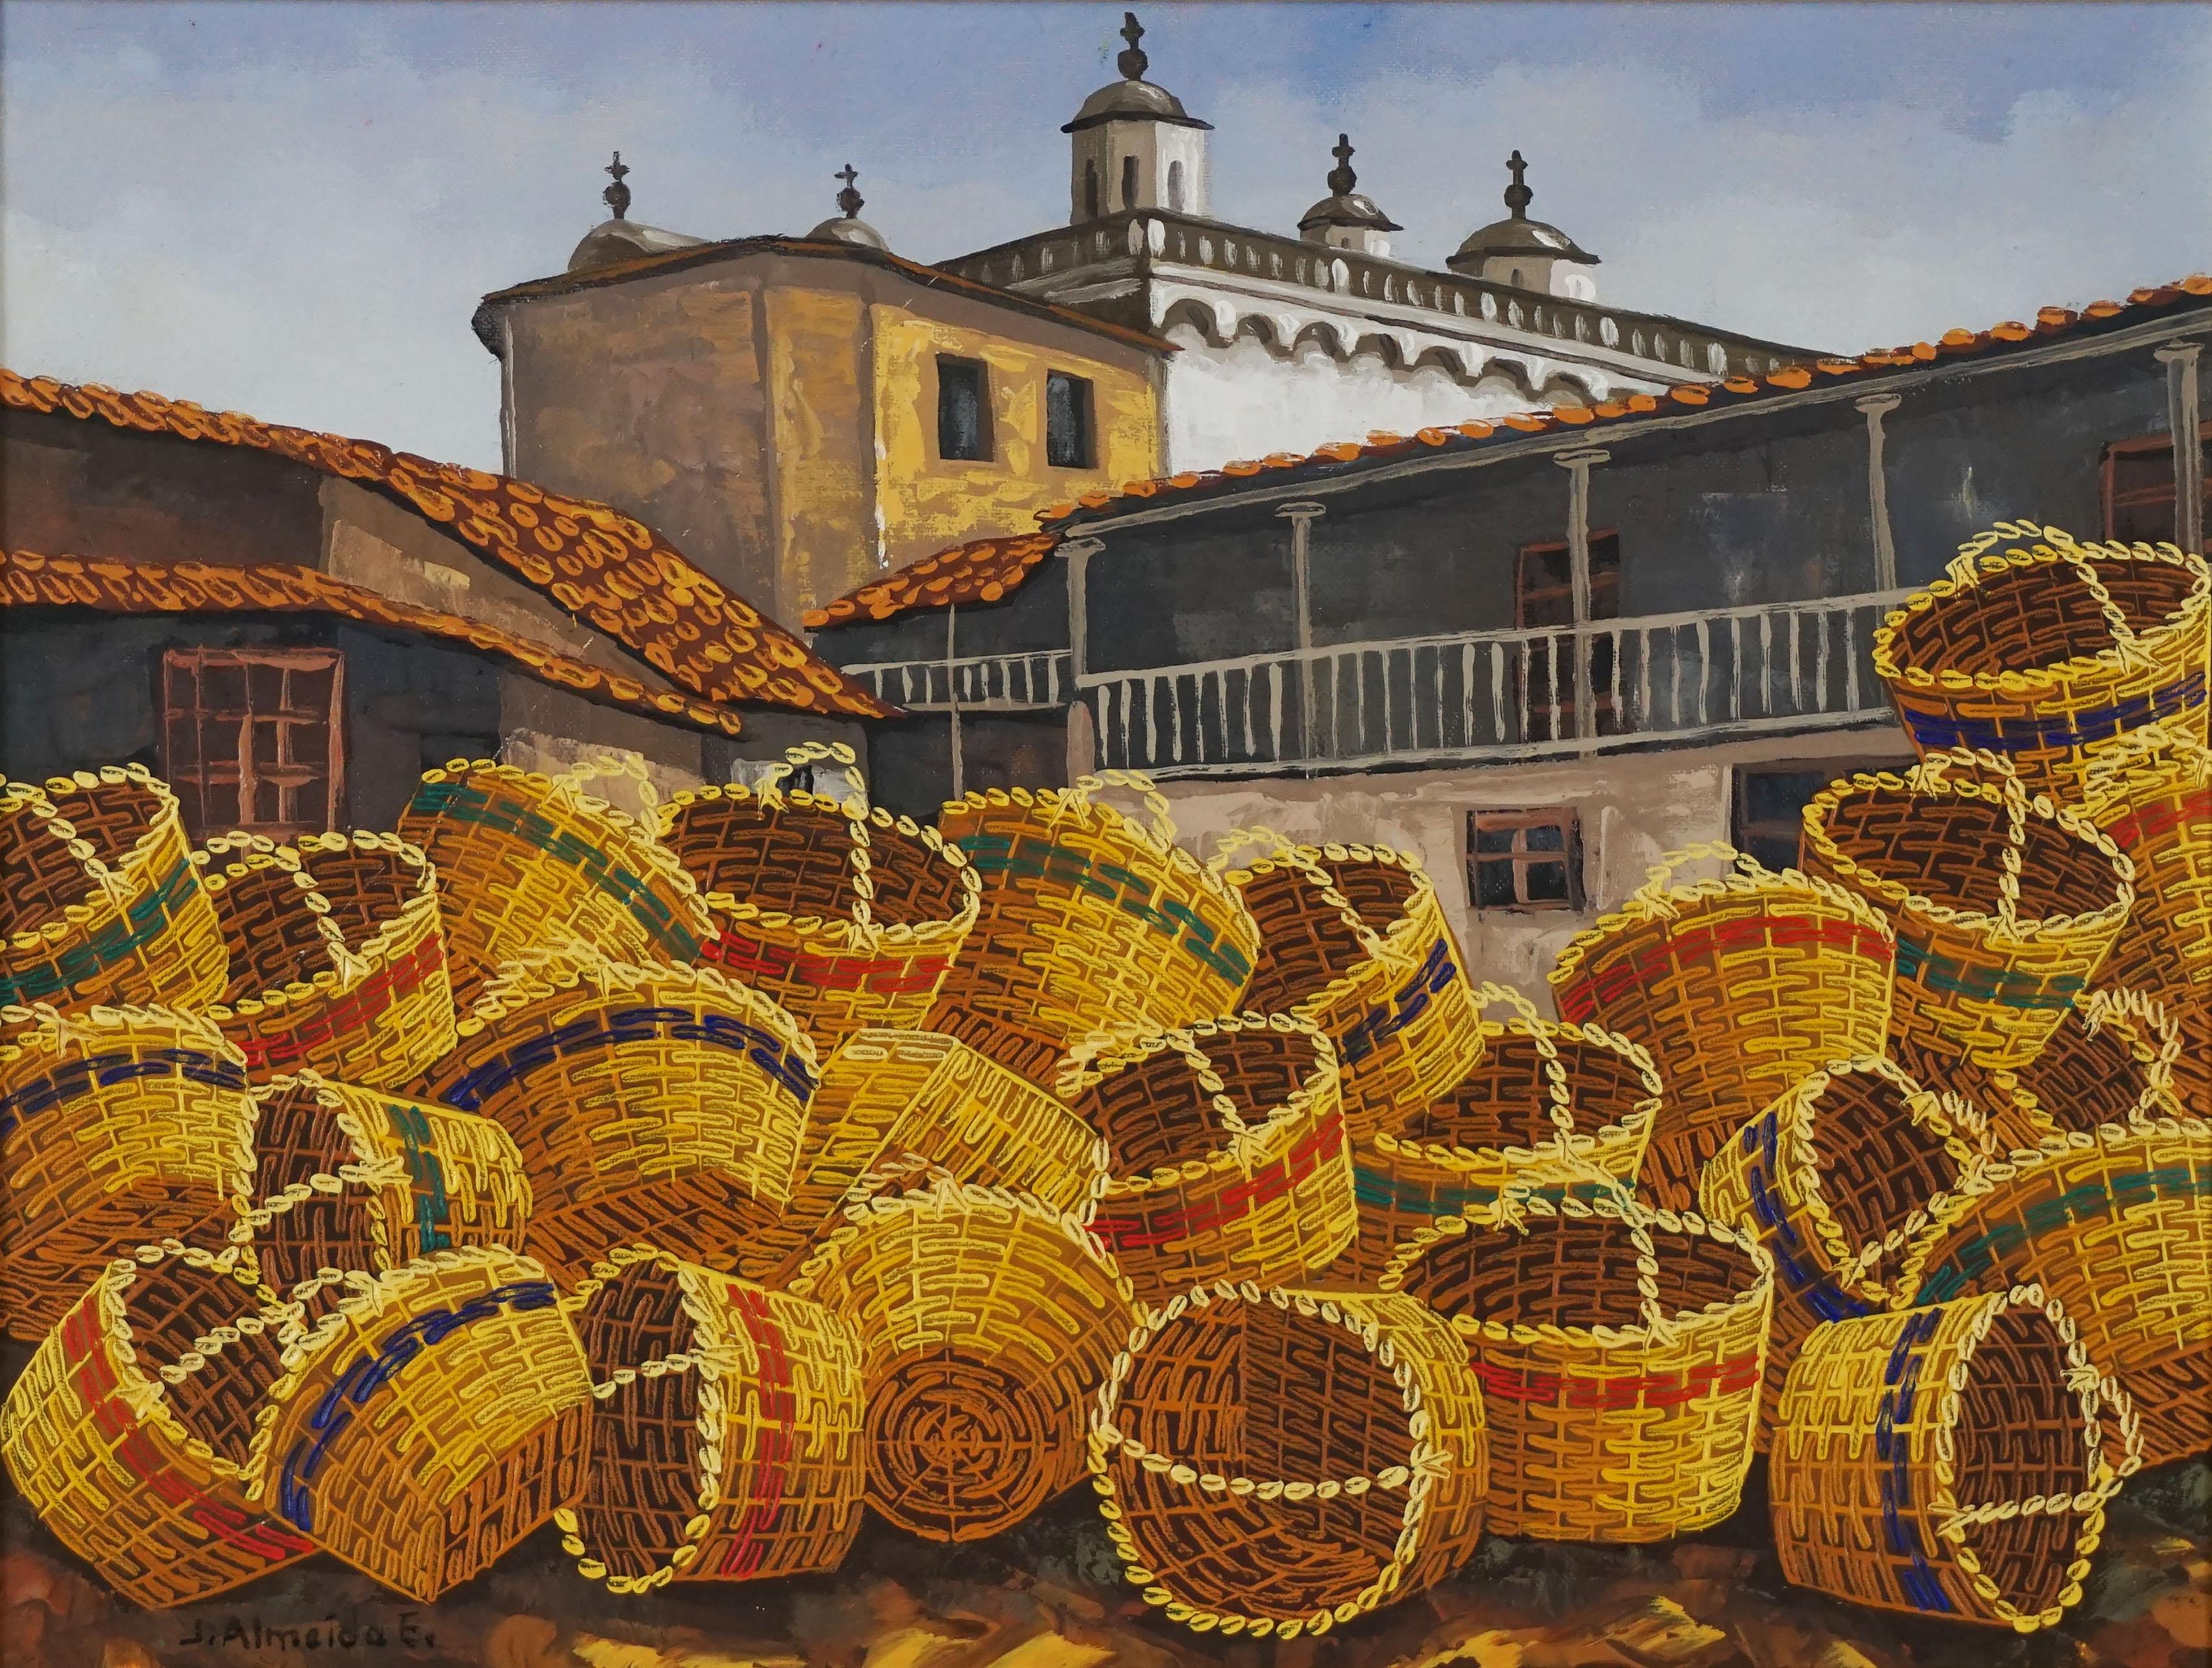 Market Baskets in Old Town - Impressionist Painting by J Almeida E